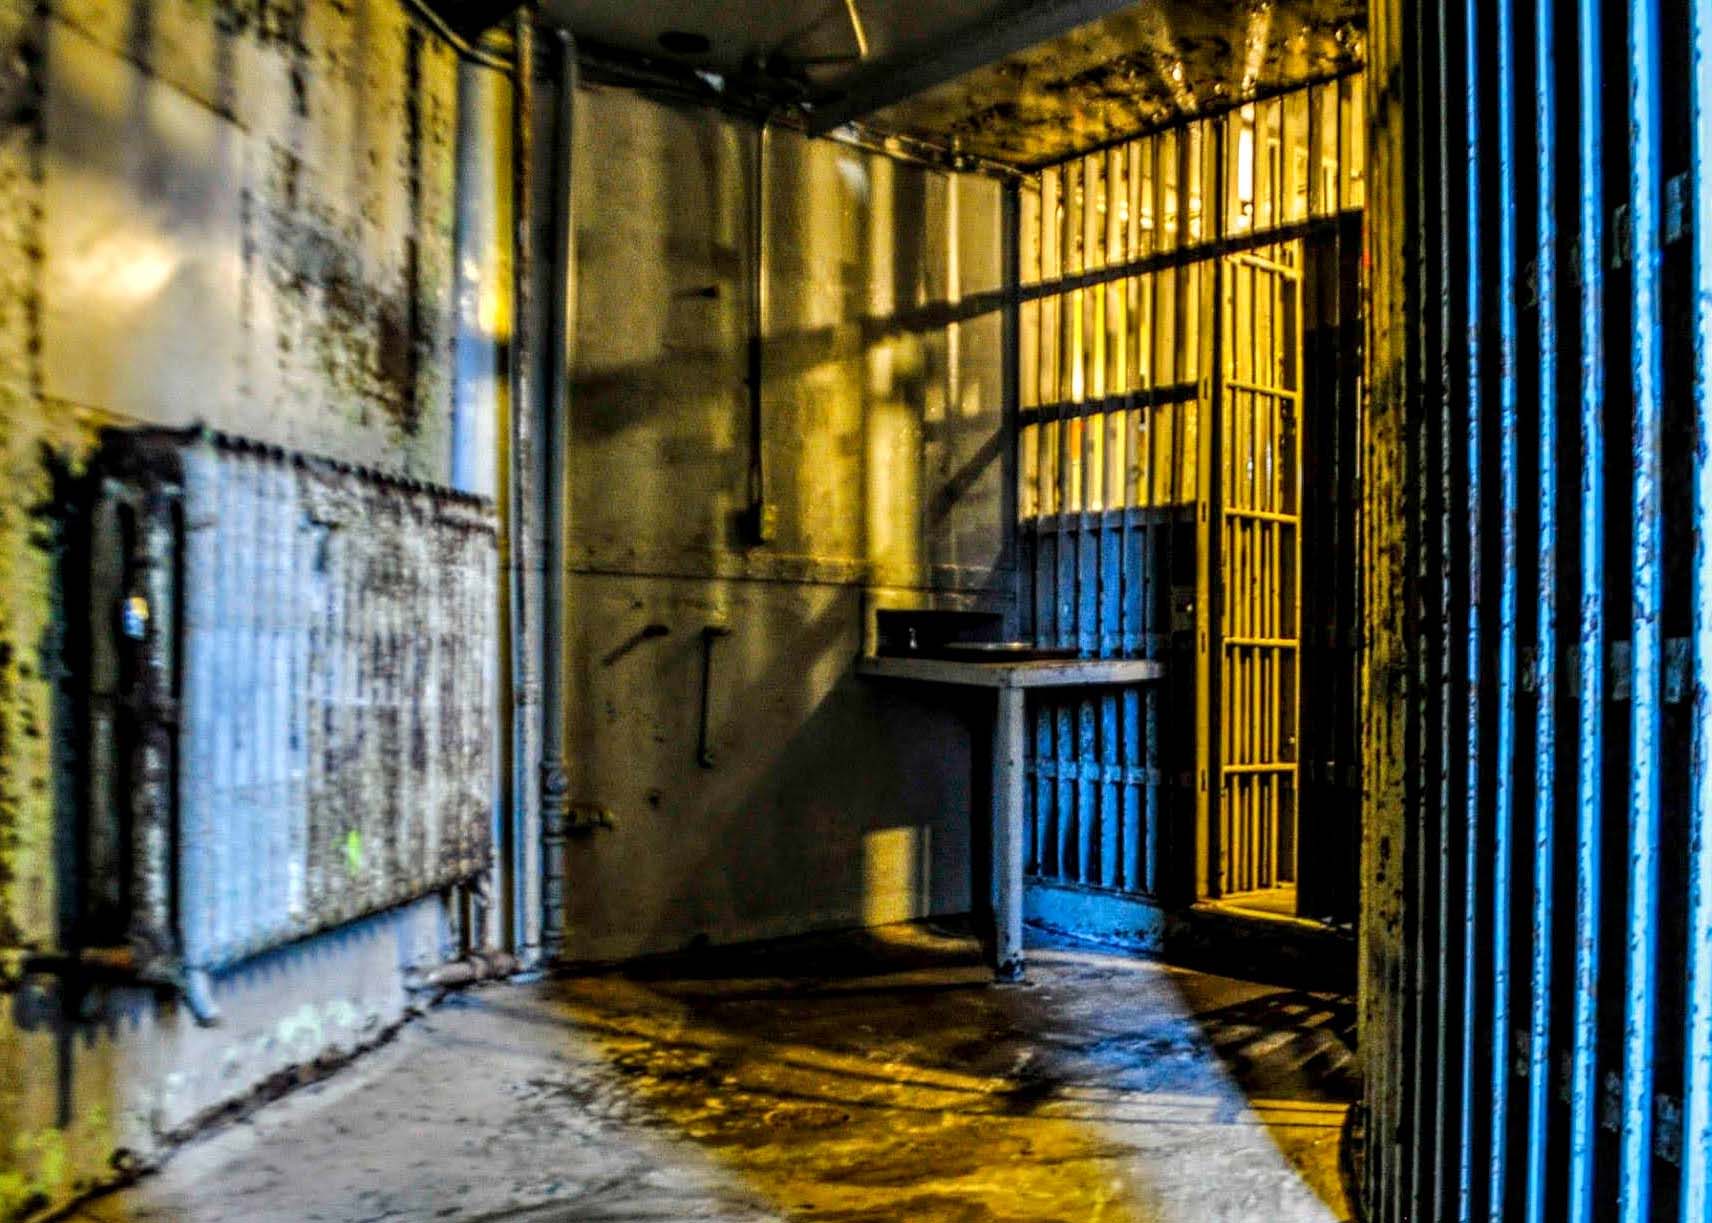 Squirrel Cage jail from FB